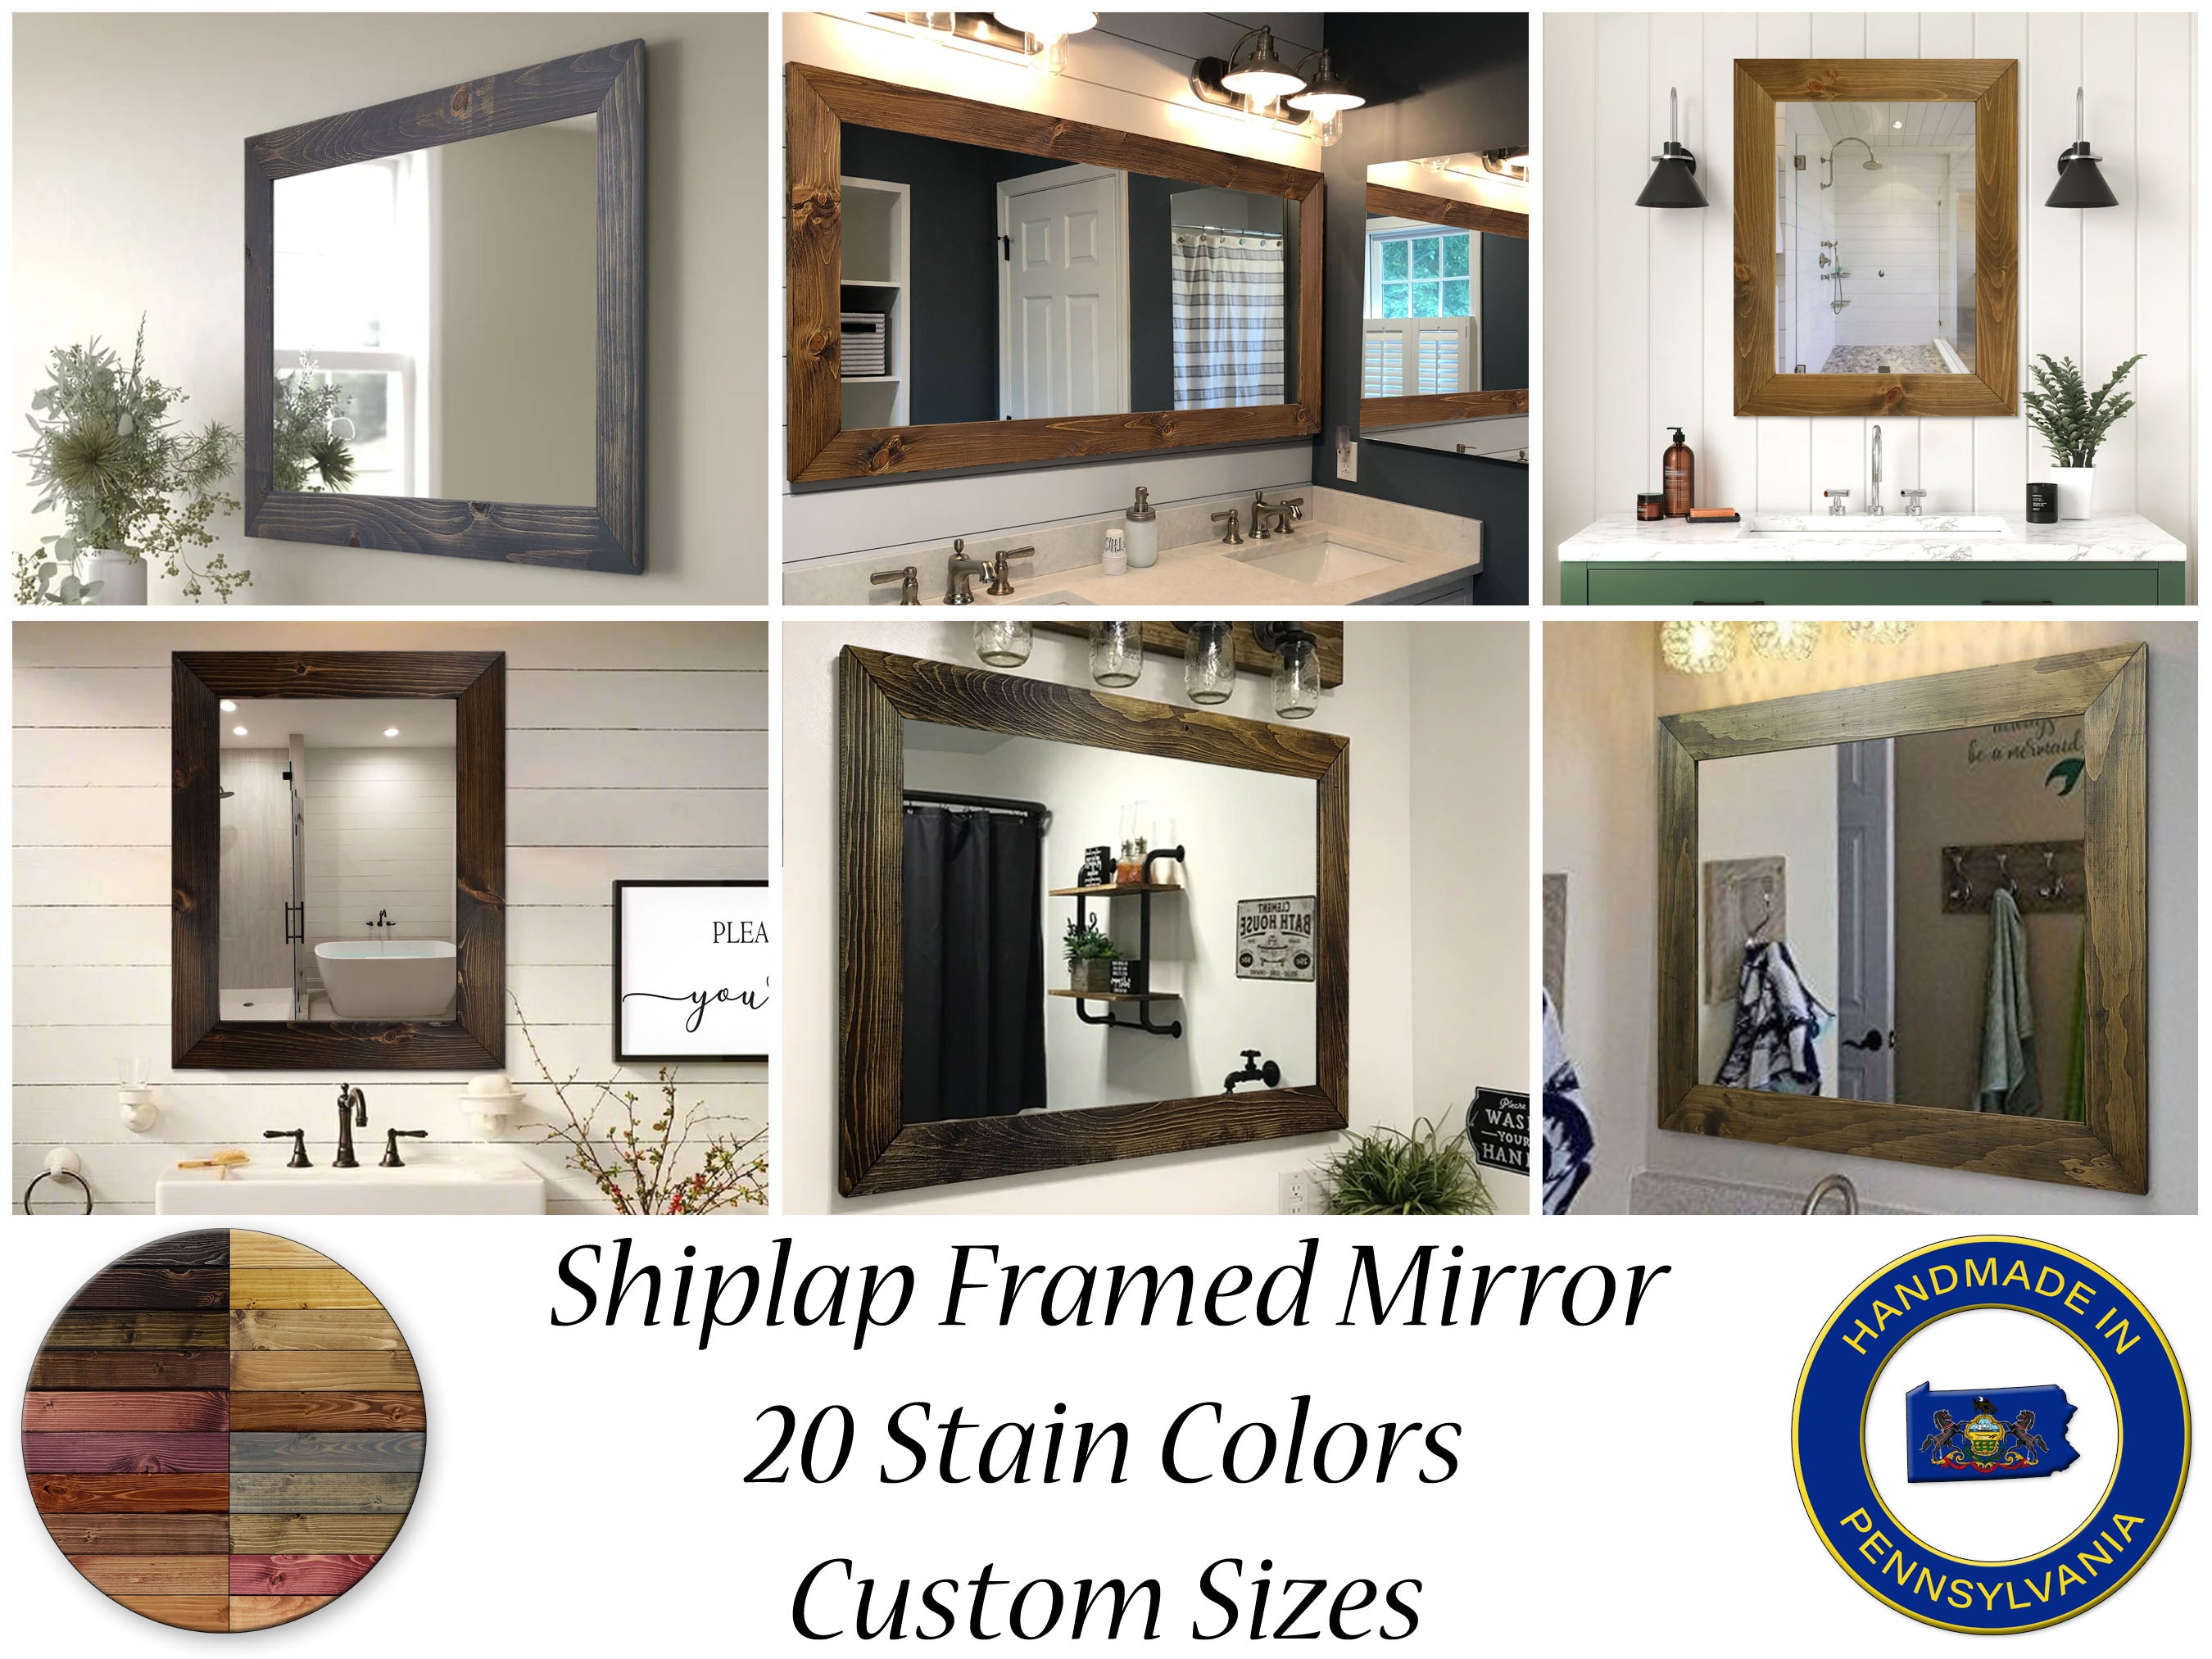 Accent Bracket Shiplap Rustic Framed Wall Mirror, Custom Sizes & 20 Stain Colors by Lane of Lenore